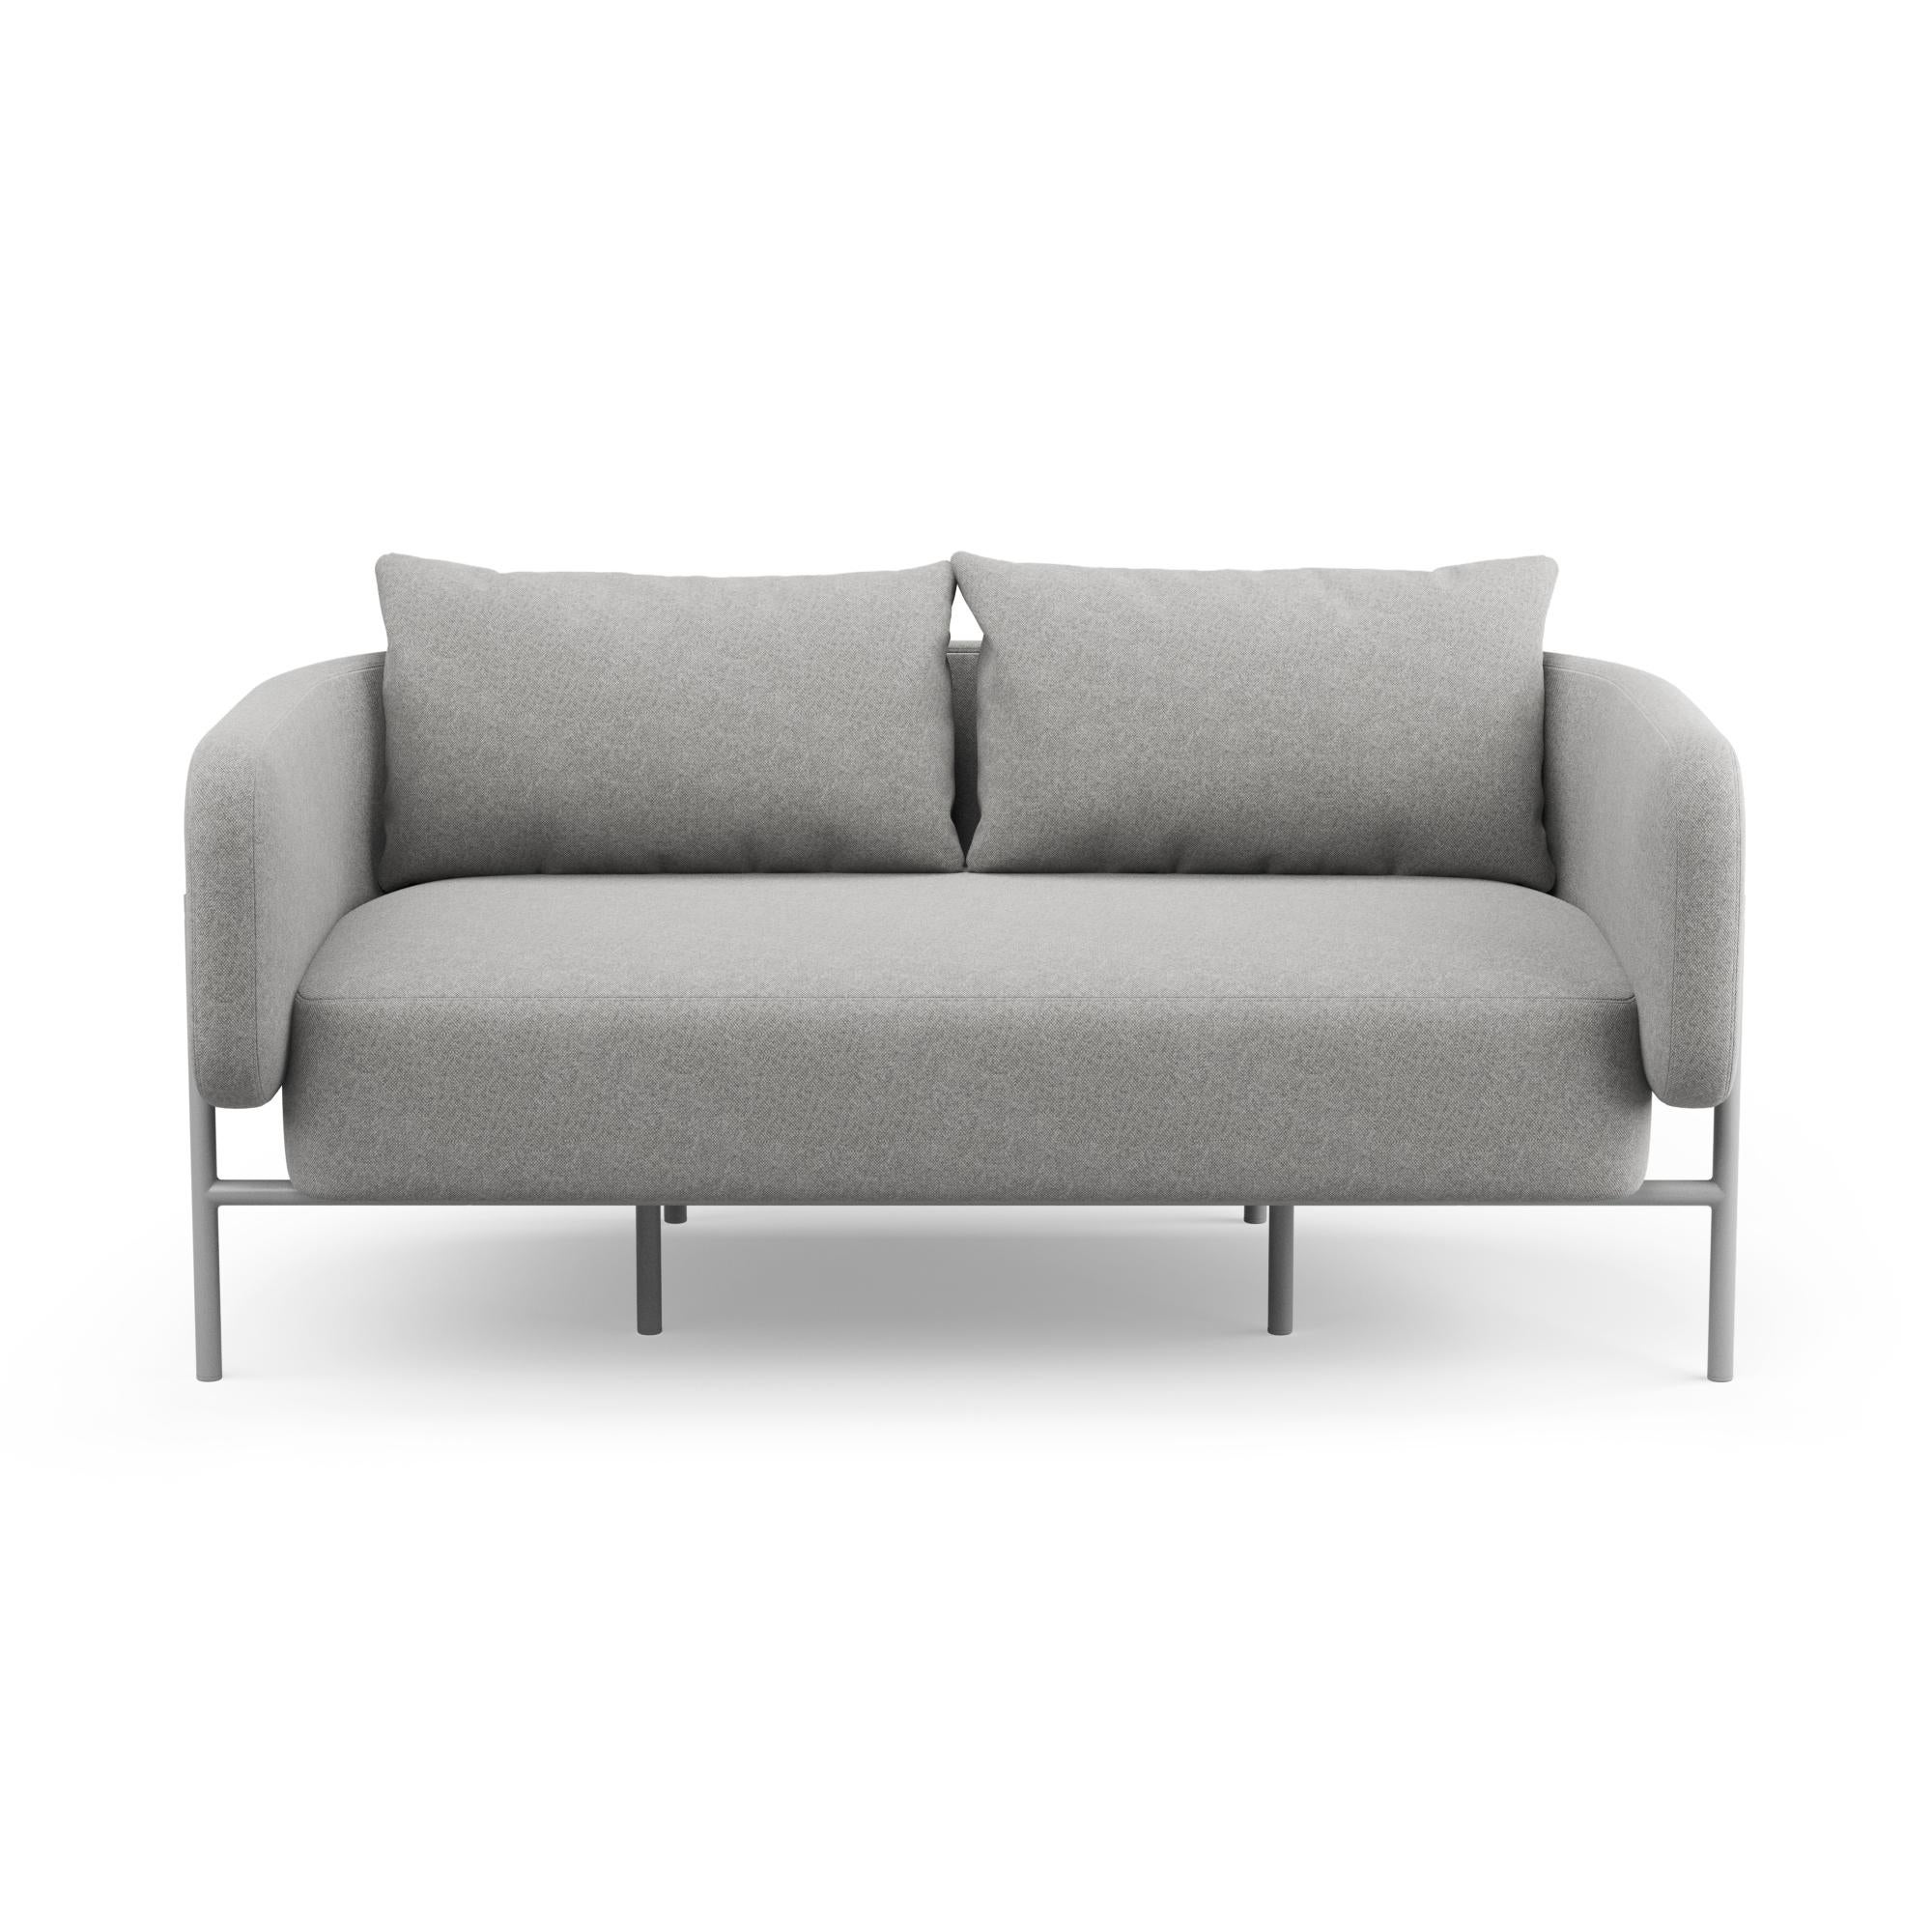 Modern Hayche Abrazo 2 Seater Sofa - Grey, UK, Made to Order For Sale